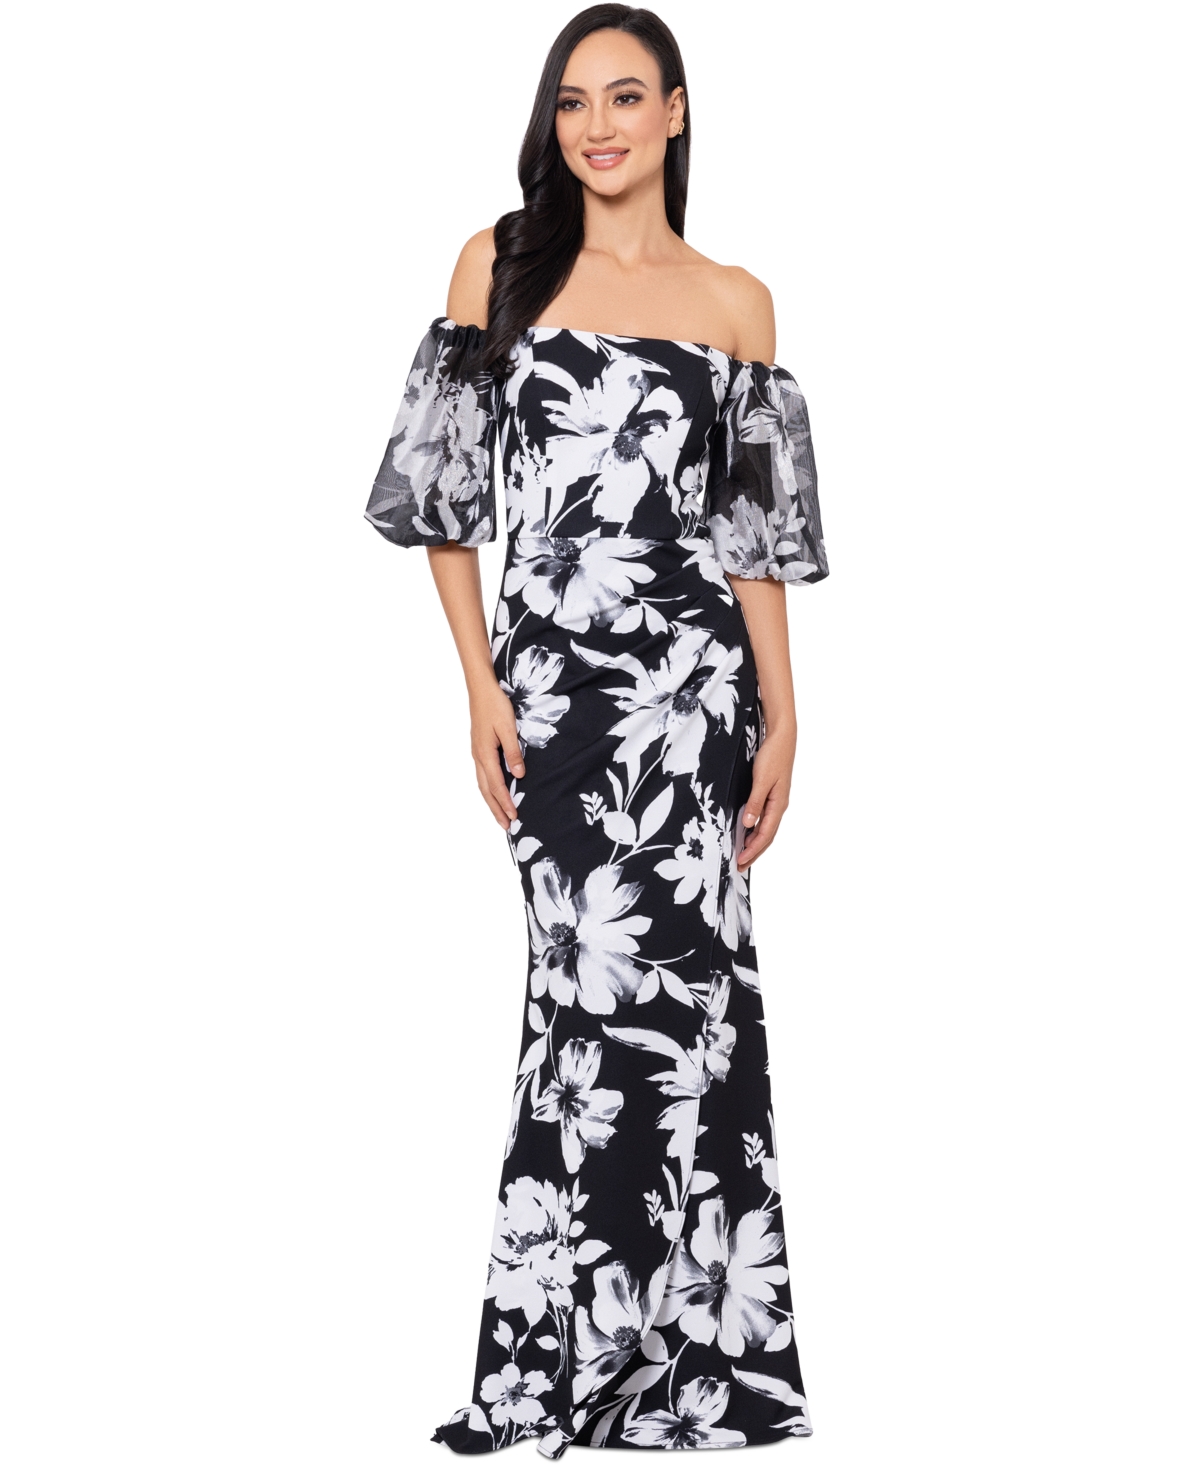 Women's Floral-Print Off-The-Shoulder Gown - Black/White